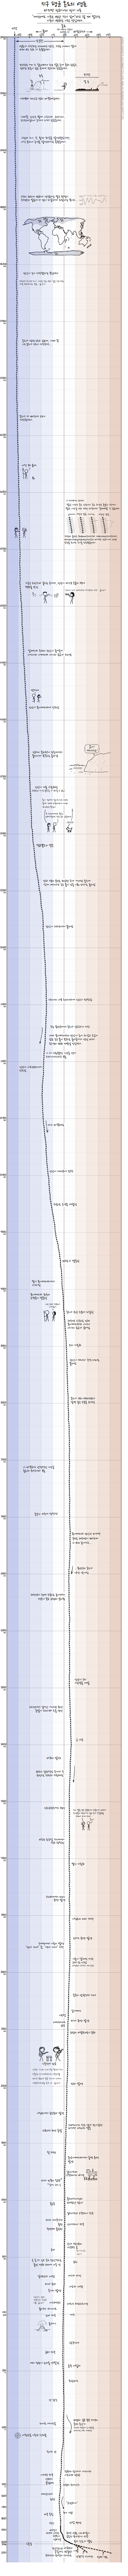 earth_temperature_timeline.png